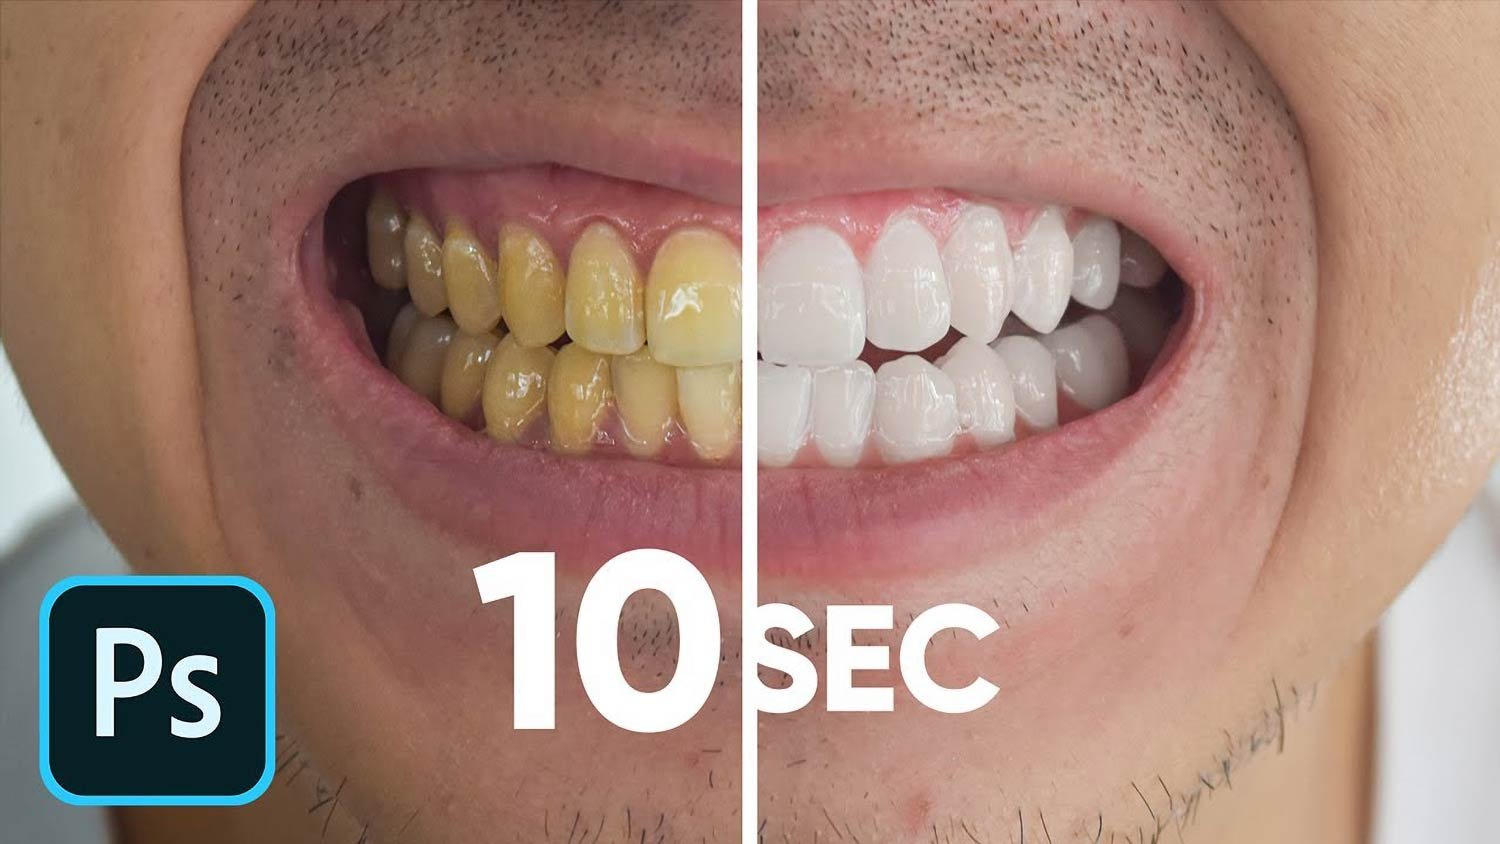 Here’s a Simple Way to Whiten Teeth in Photoshop in Just 10 Seconds